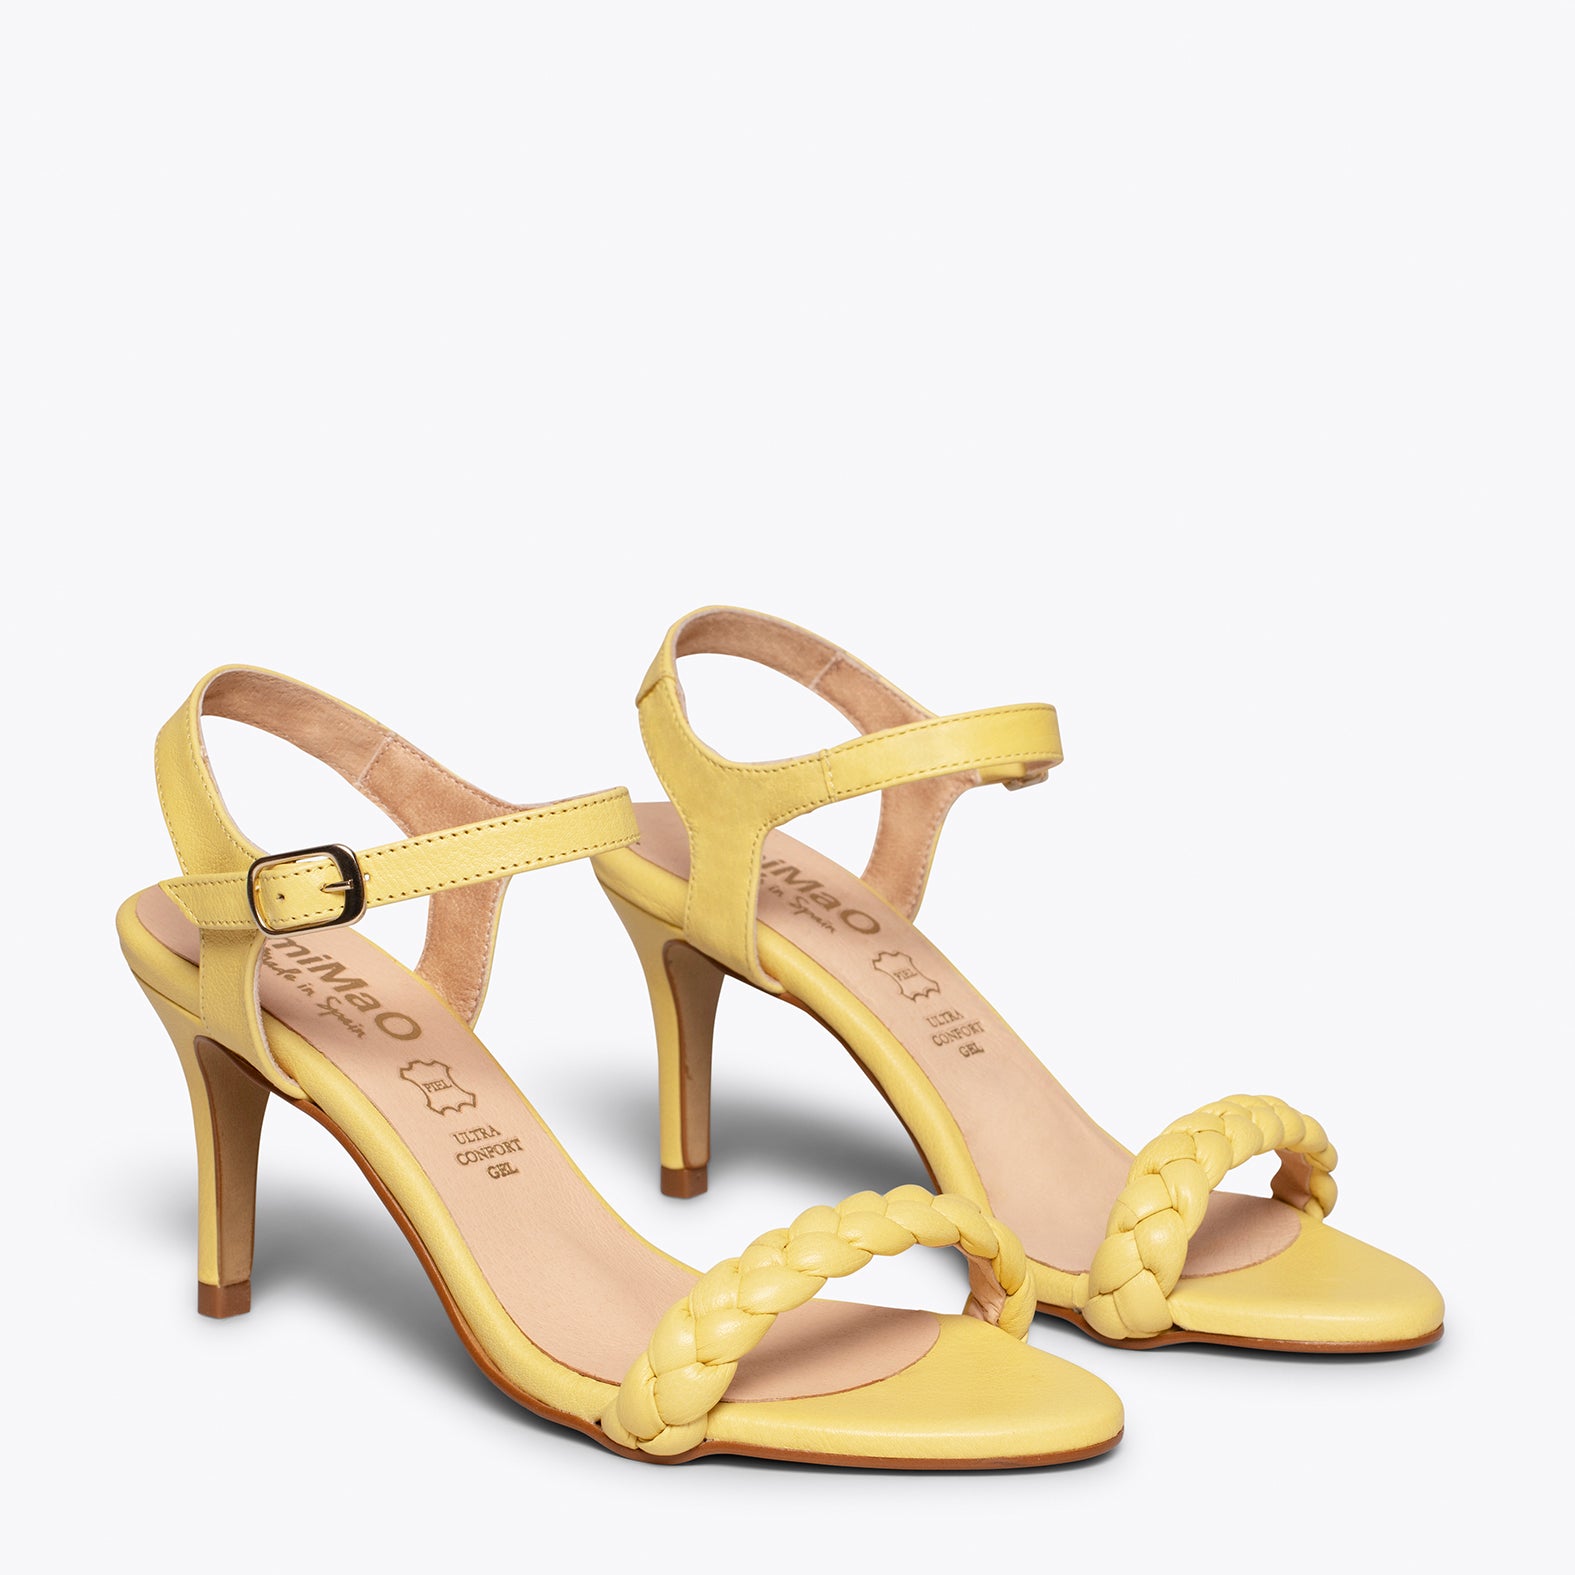 SUNSET – YELLOW elegant sandals with a braided strap